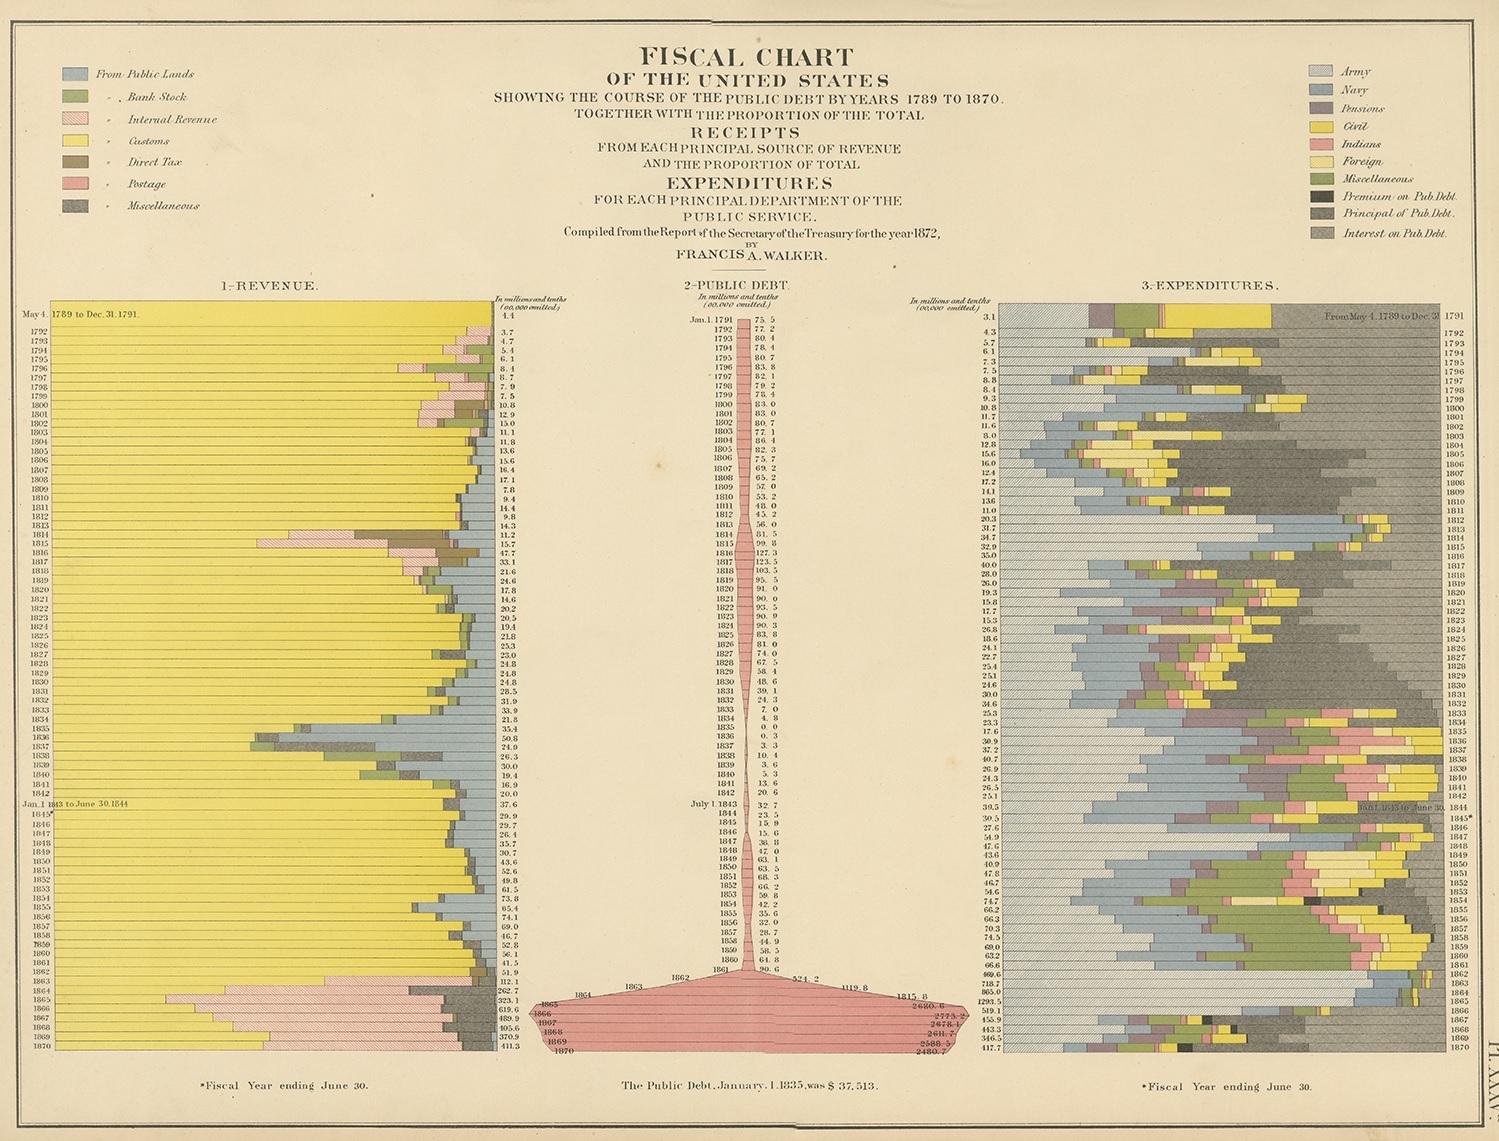 Antique chart titled 'Fiscal chart of the United States showing the course of the public debt by years 1789-1870 together with the proportion of the total receipts from each principal source of revenue and the proportion of total expenditures for